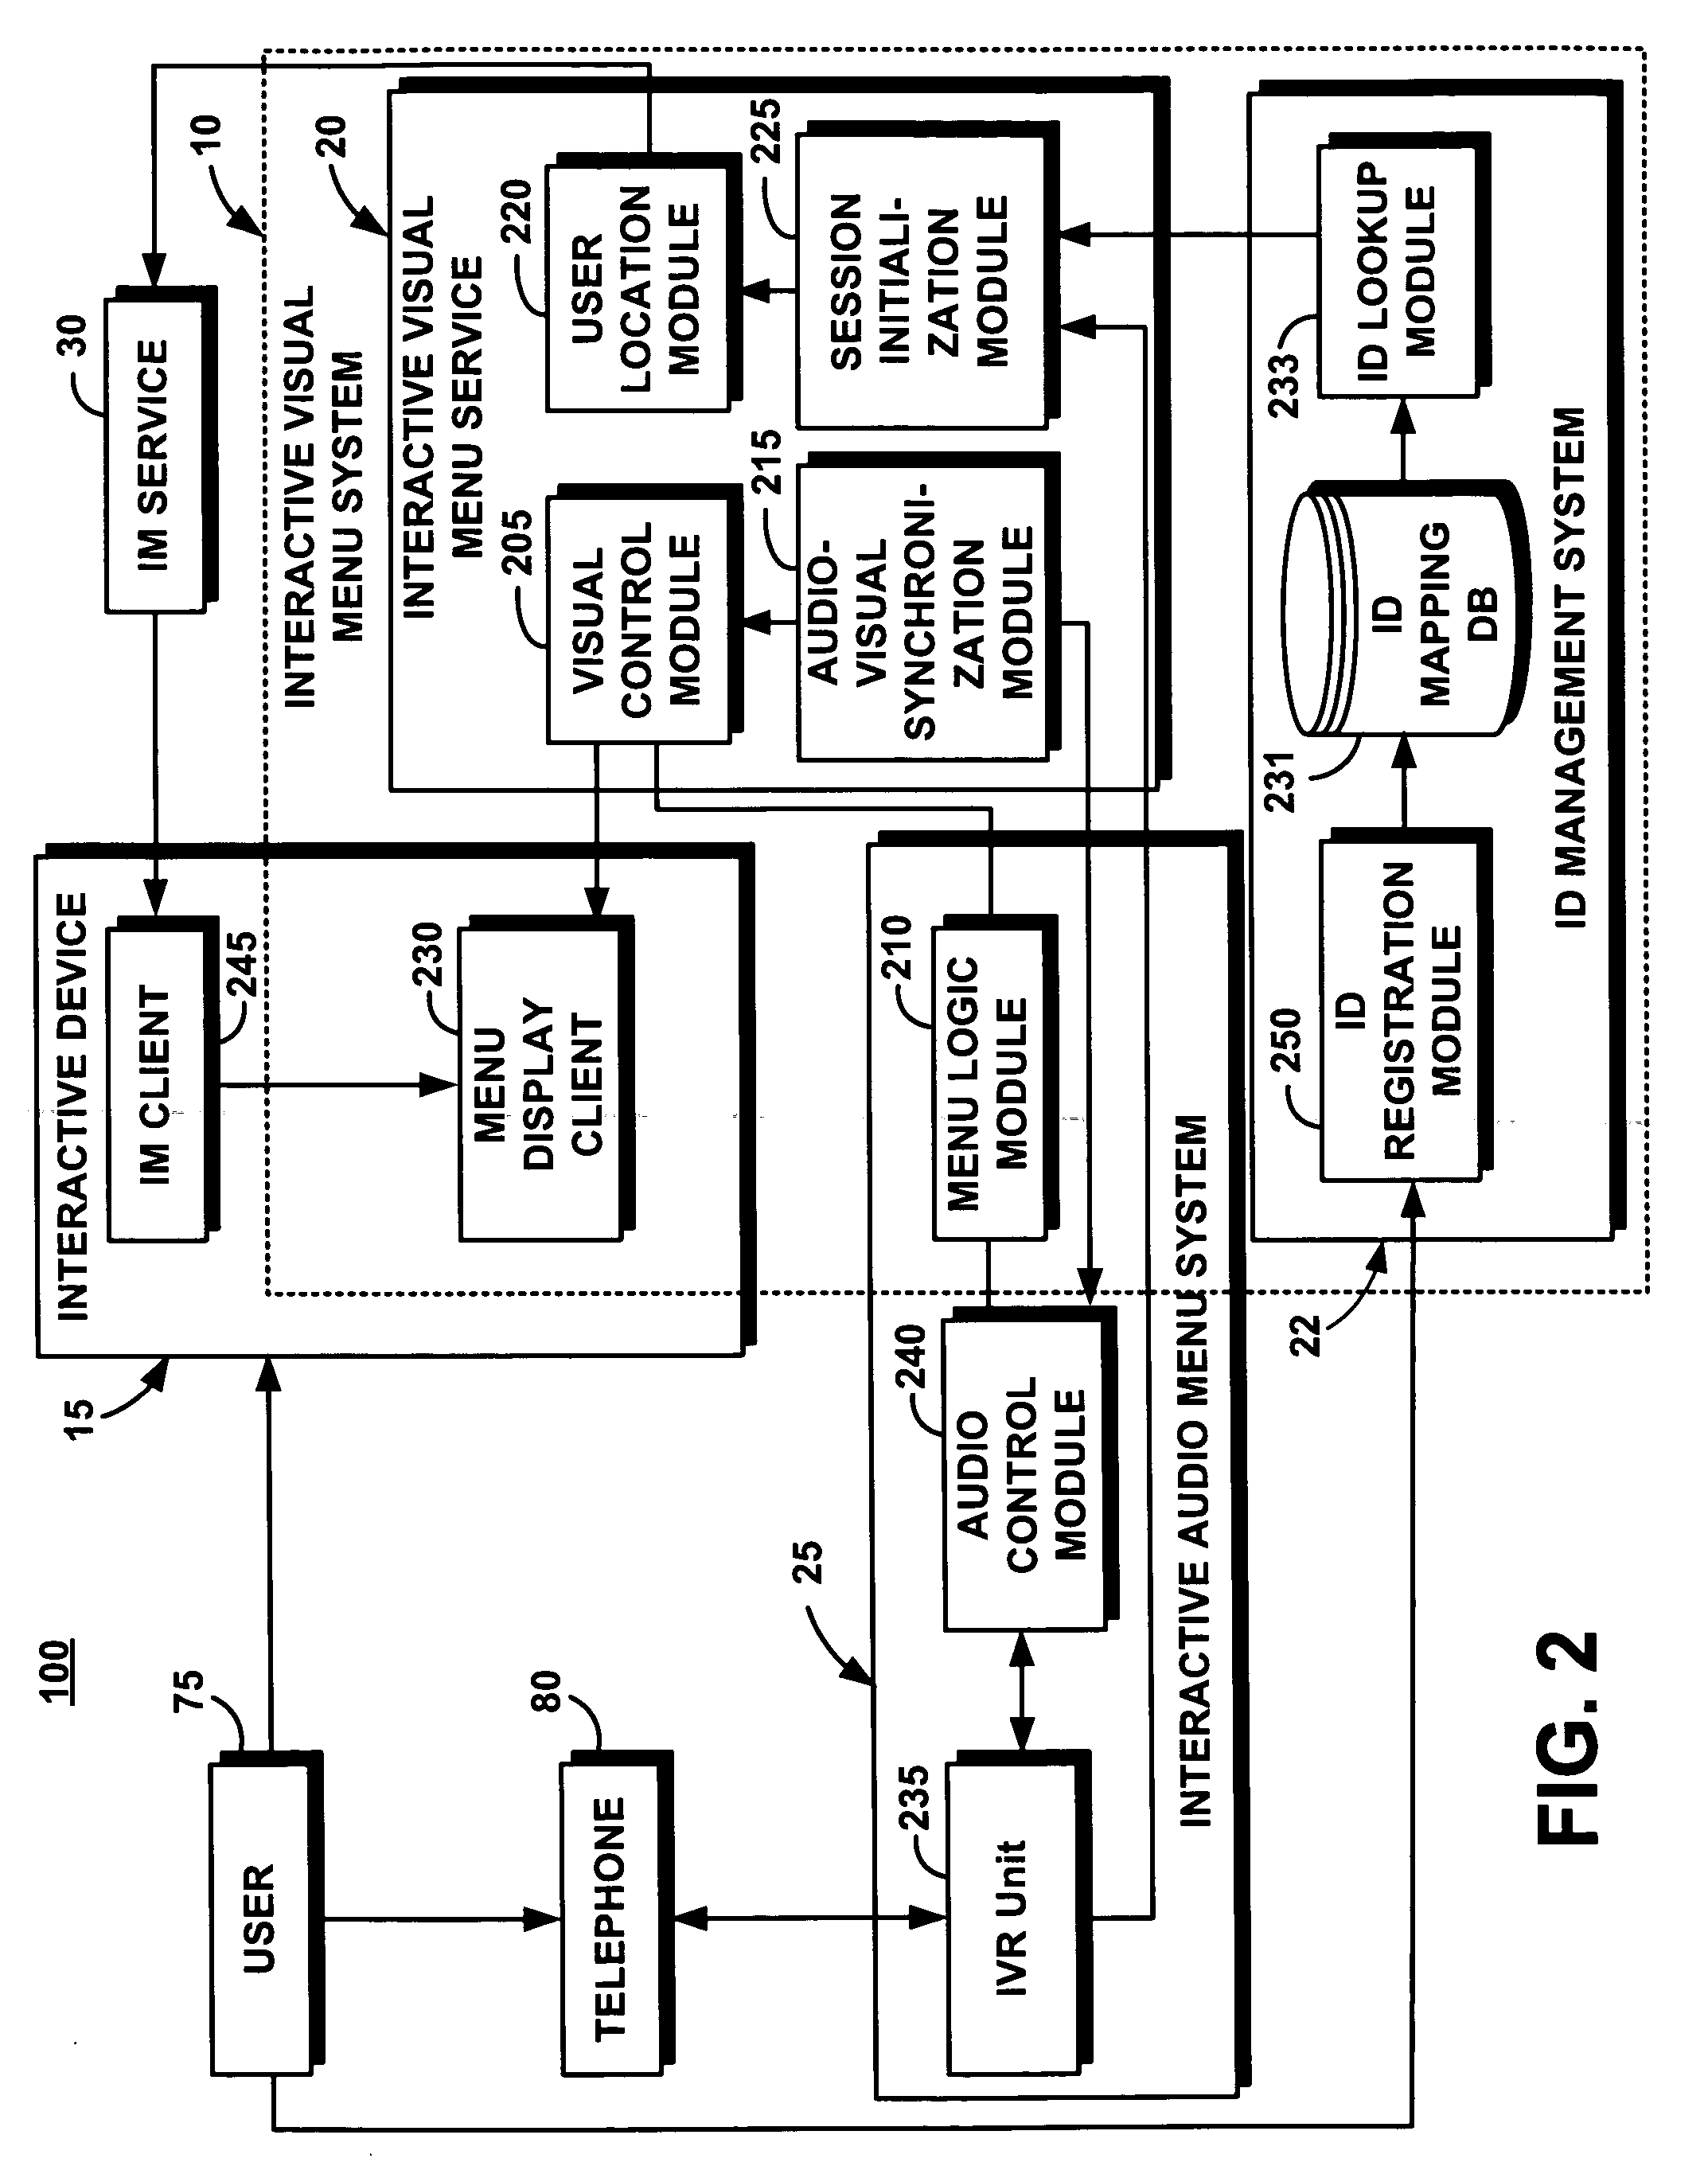 System and method for seamlessly integrating an interactive visual menu with an voice menu provided in an interactive voice response system